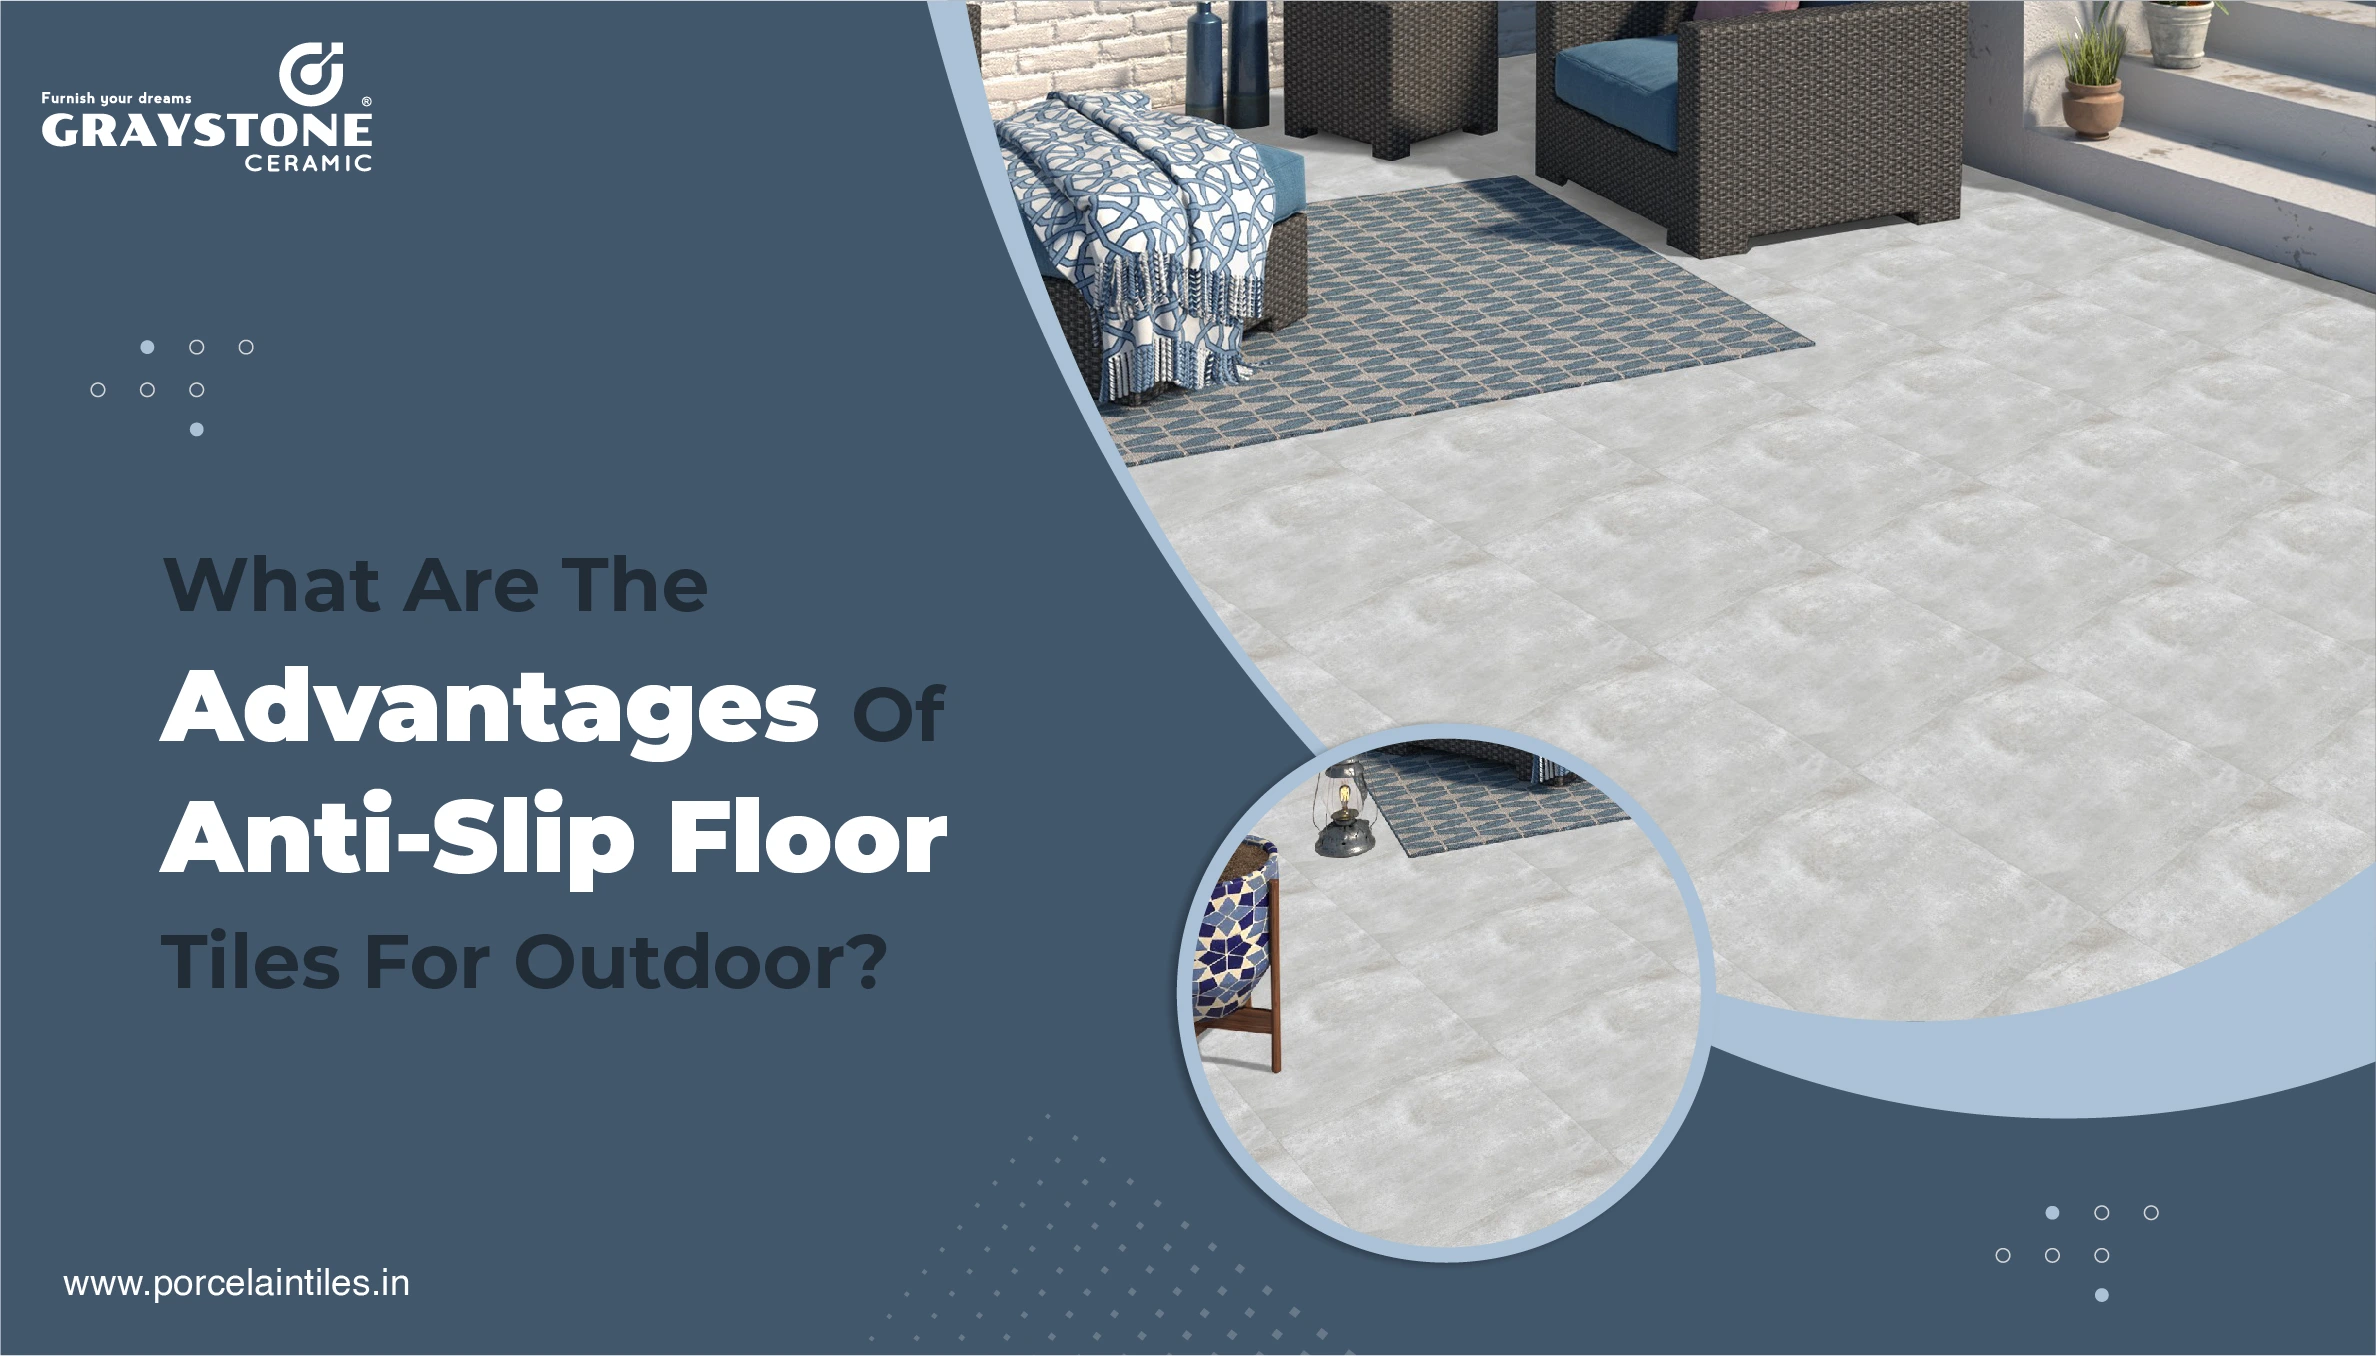 What Are The Advantages Of Anti-Slip Floor Tiles For Outdoor?